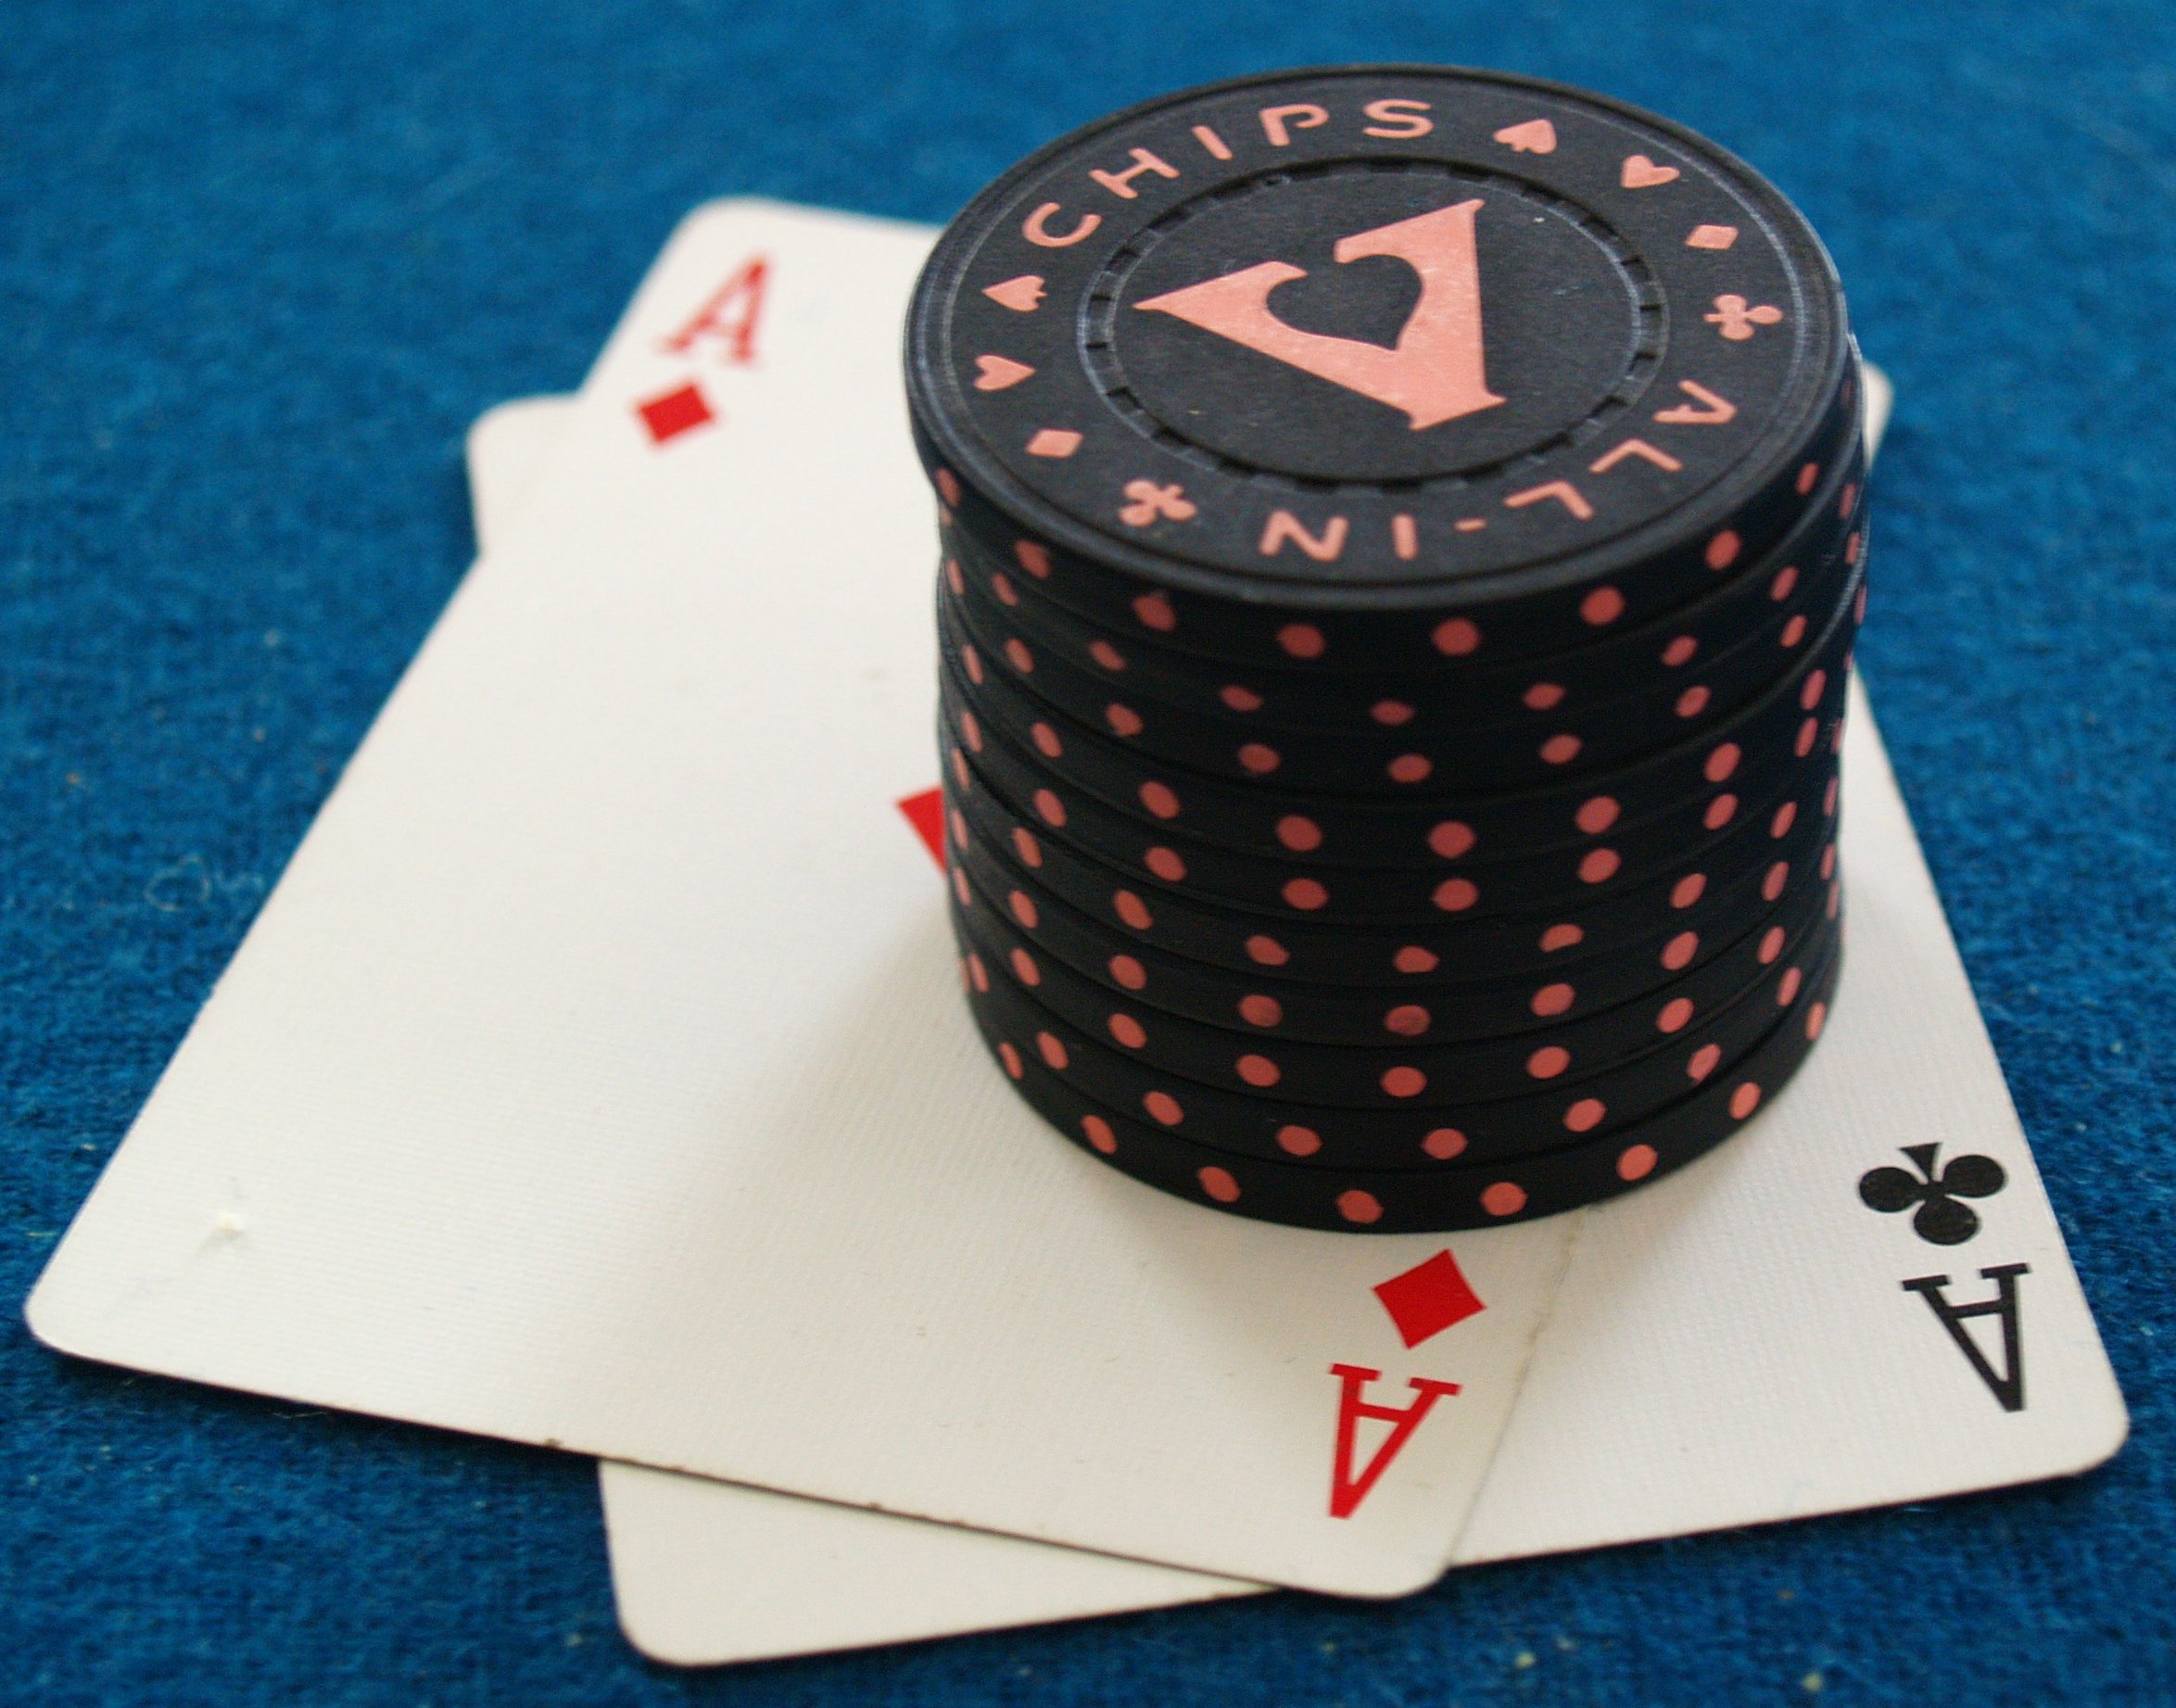 Low Pocket Pair in Texas Hold’em: Making the Most of Small but Mighty Hands